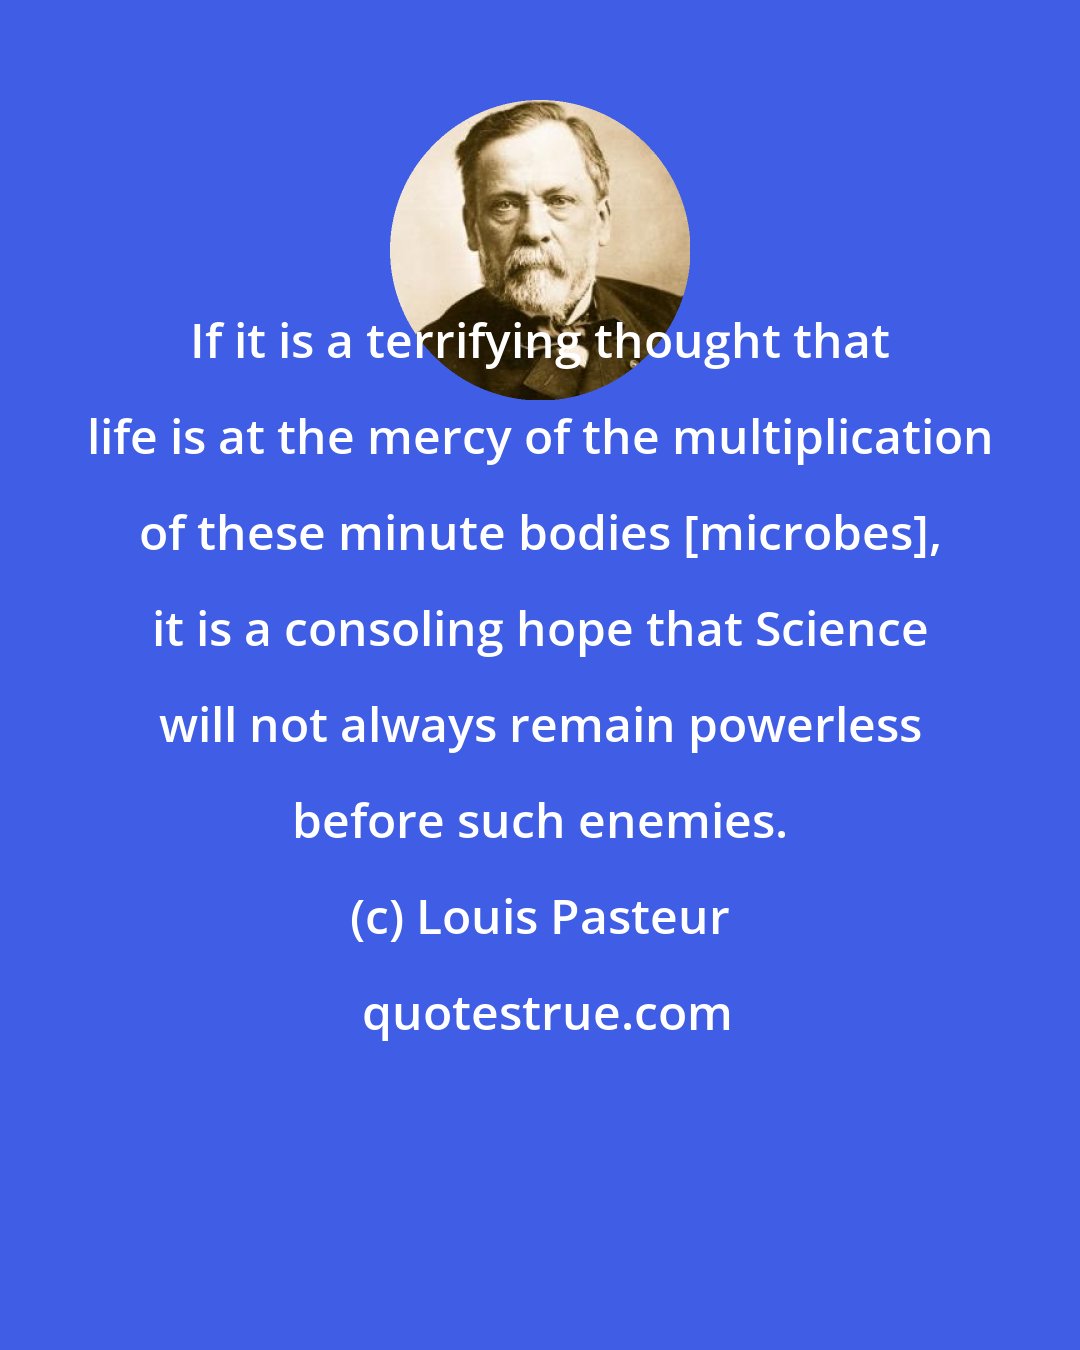 Louis Pasteur: If it is a terrifying thought that life is at the mercy of the multiplication of these minute bodies [microbes], it is a consoling hope that Science will not always remain powerless before such enemies.